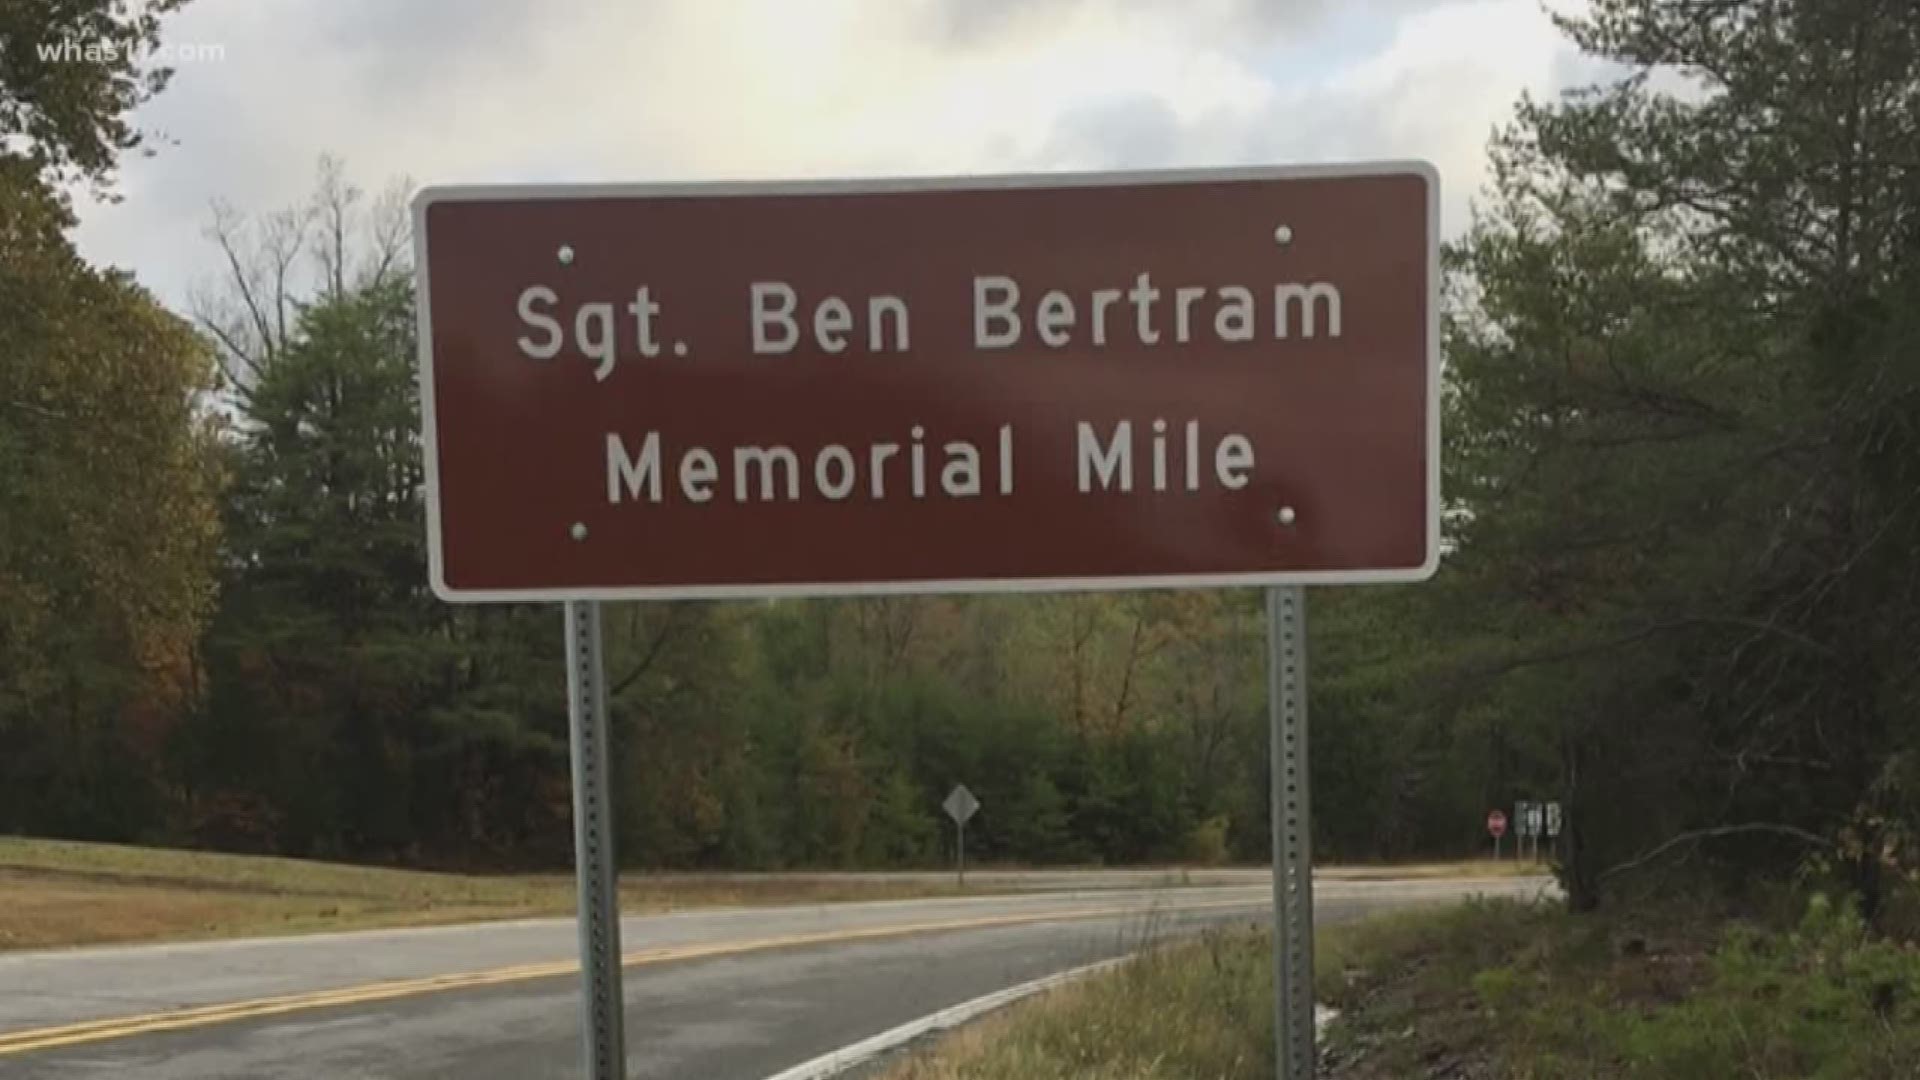 Sgt. Bertram of Charlestown died in 2018 in a car chase.